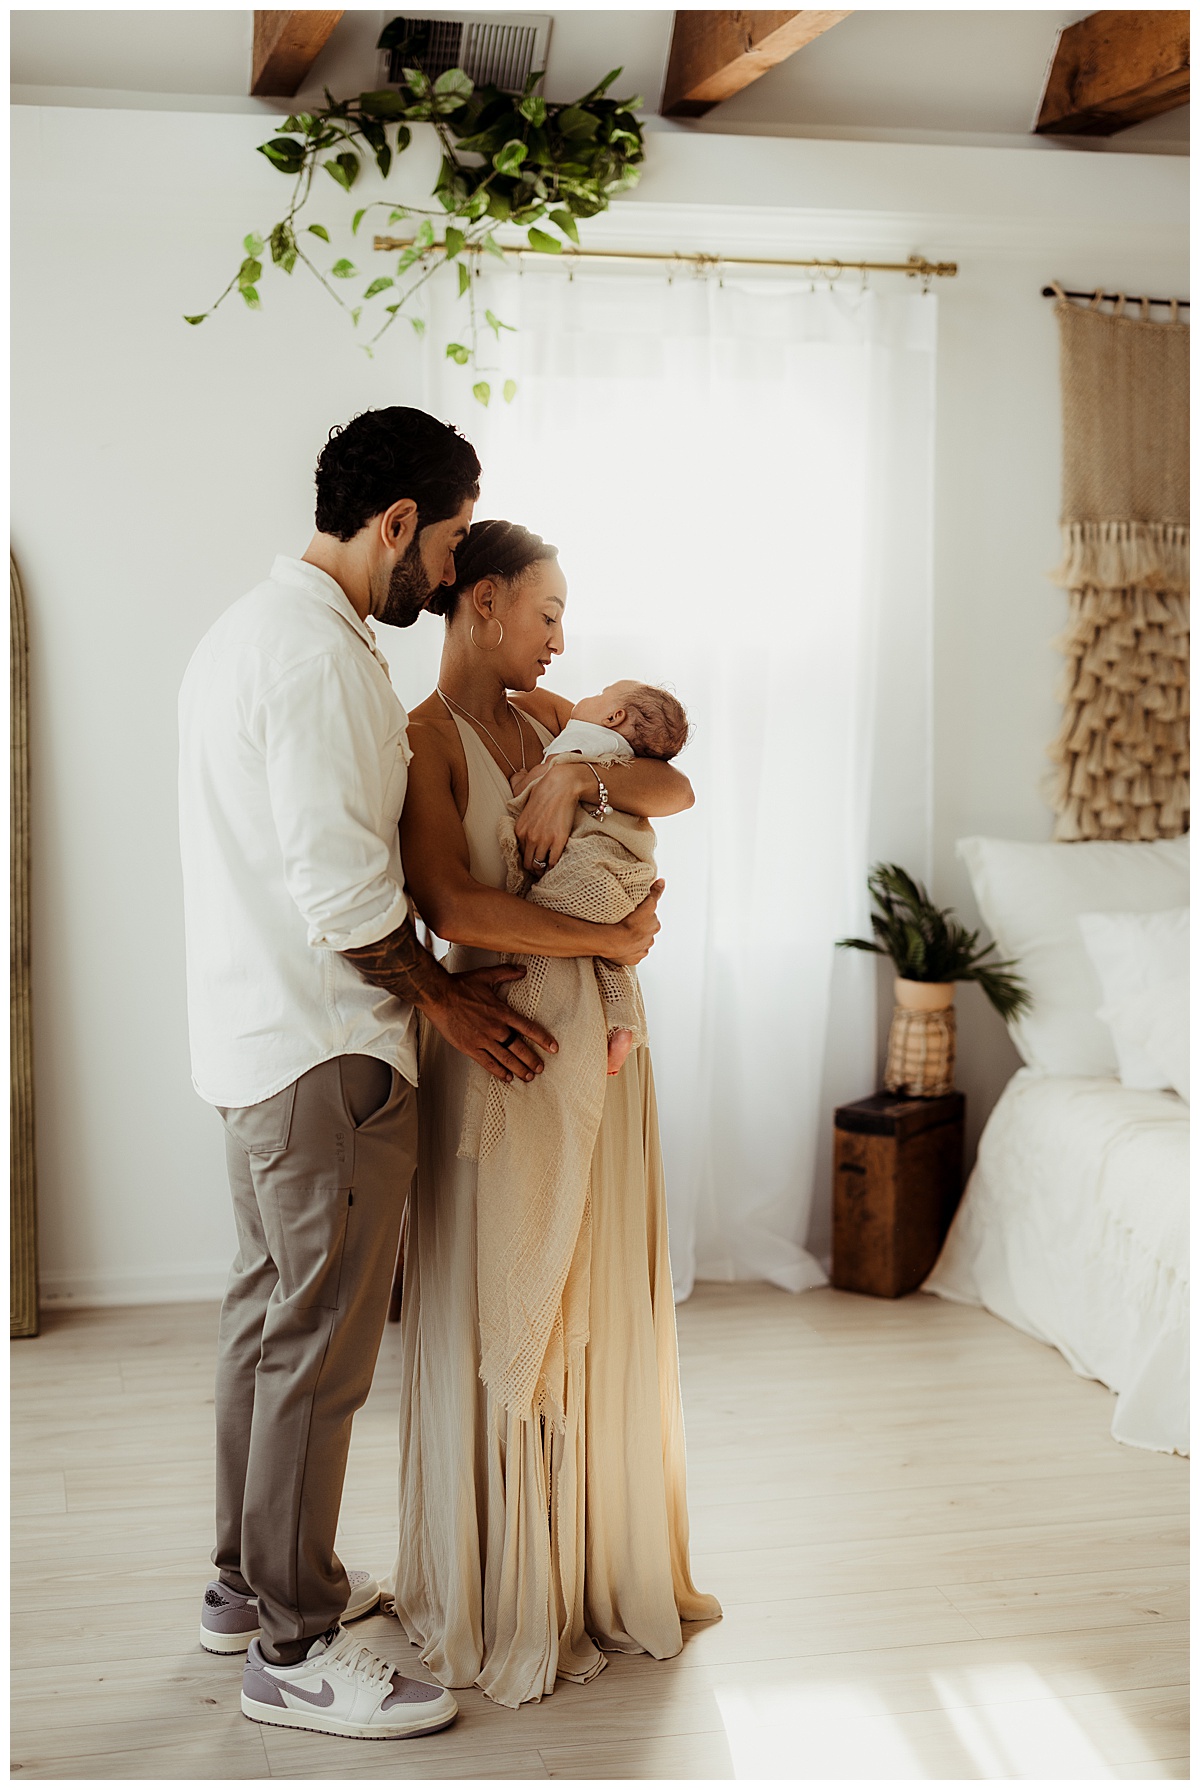 Parents smile at their baby during their Lifestyle Newborn Session